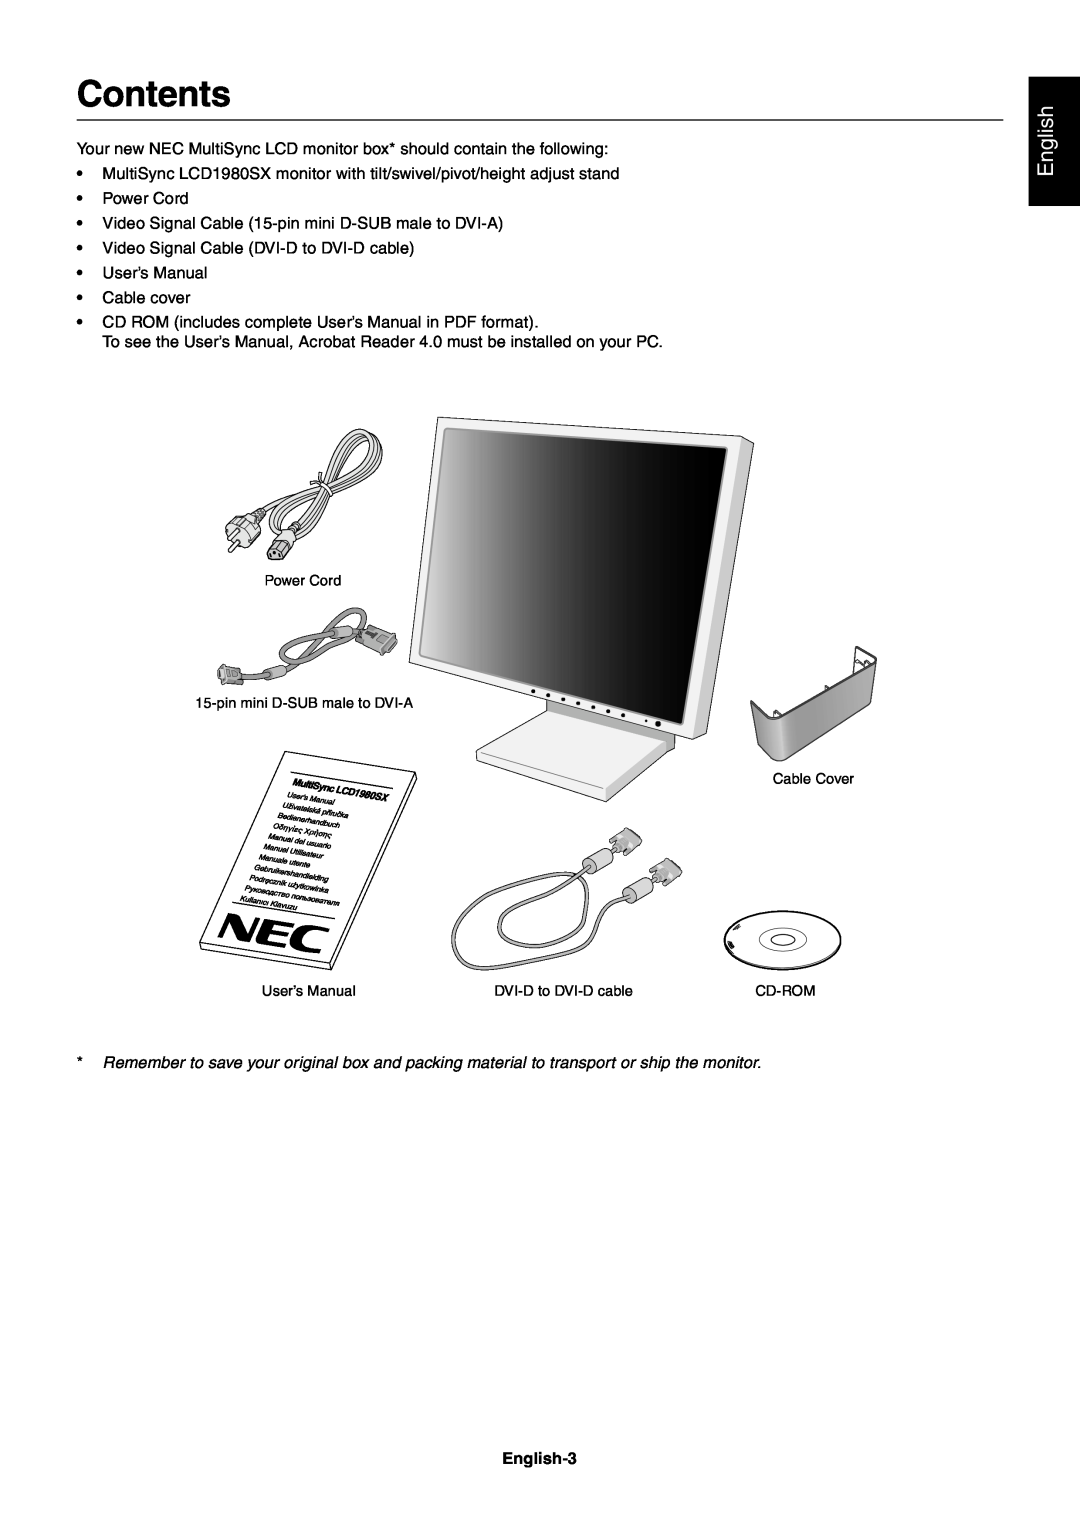 NEC LCD1980SX user manual Contents, English-3 